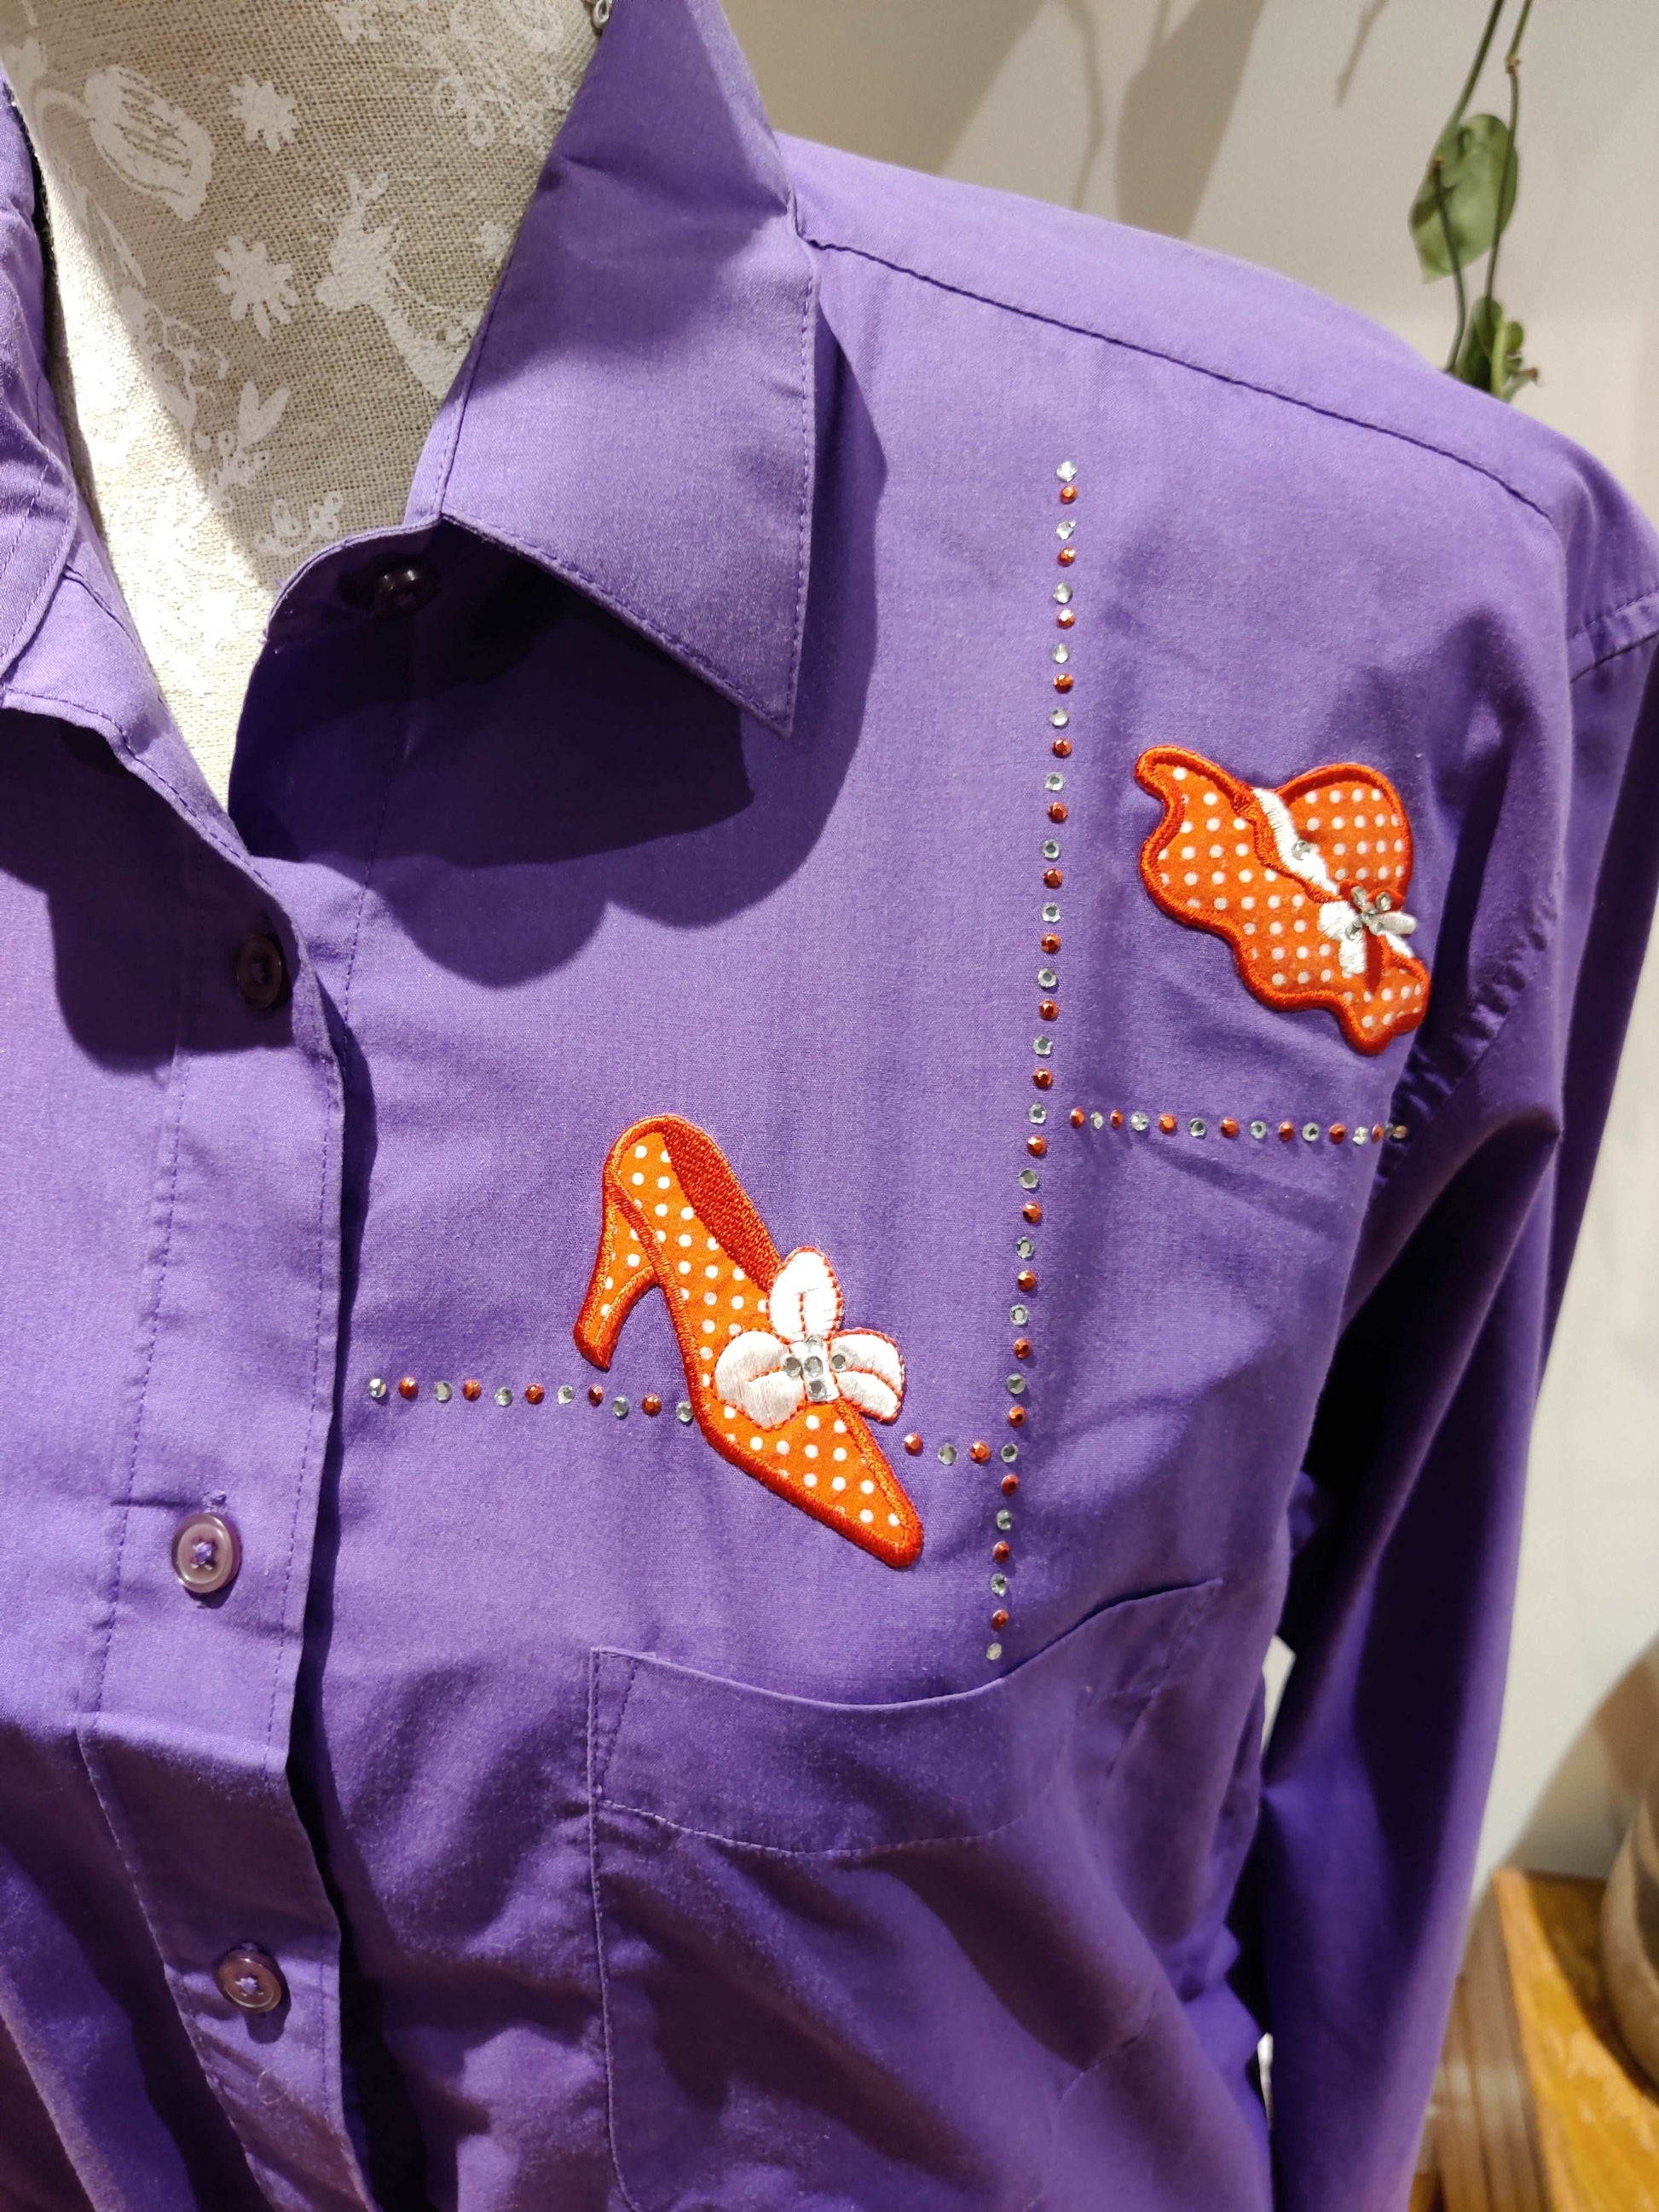 Cute purple blouse with red accessories applique